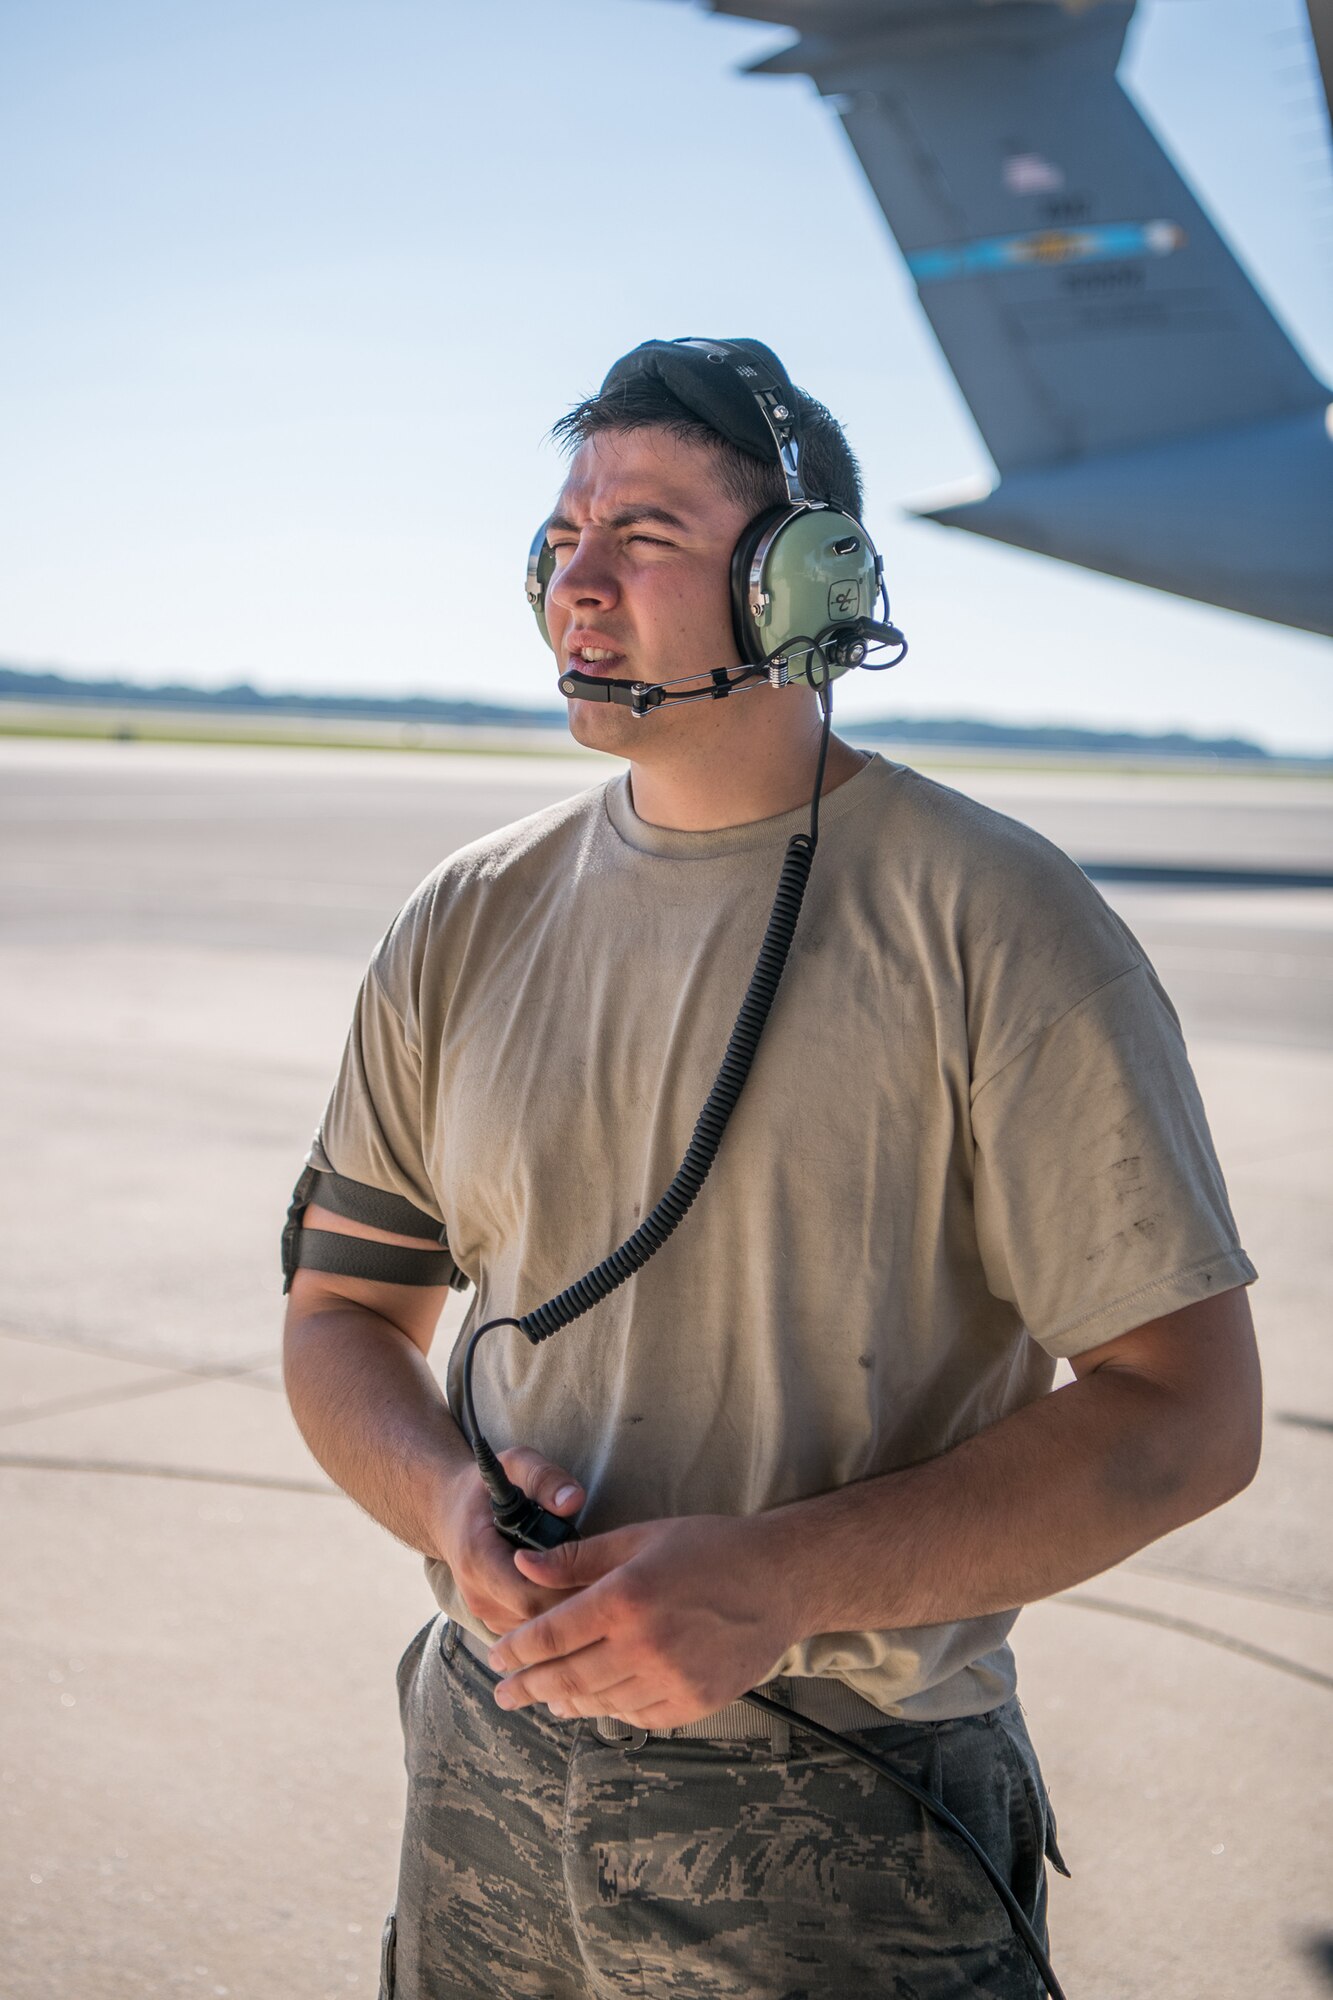 Senior Airman Thunderiel Cardoza, 436th Maintenance Squadron C-17 aircraft hydraulics journeyman, communicates with a fellow airman through his radio headset June 27, 2019, at Dover Air Force Base, Del. Airmen simultaneously performing maintenance tasks in various parts of the aircraft must maintain constant  communication with each other via radio. (U.S. Air Force photo by Mauricio Campino)